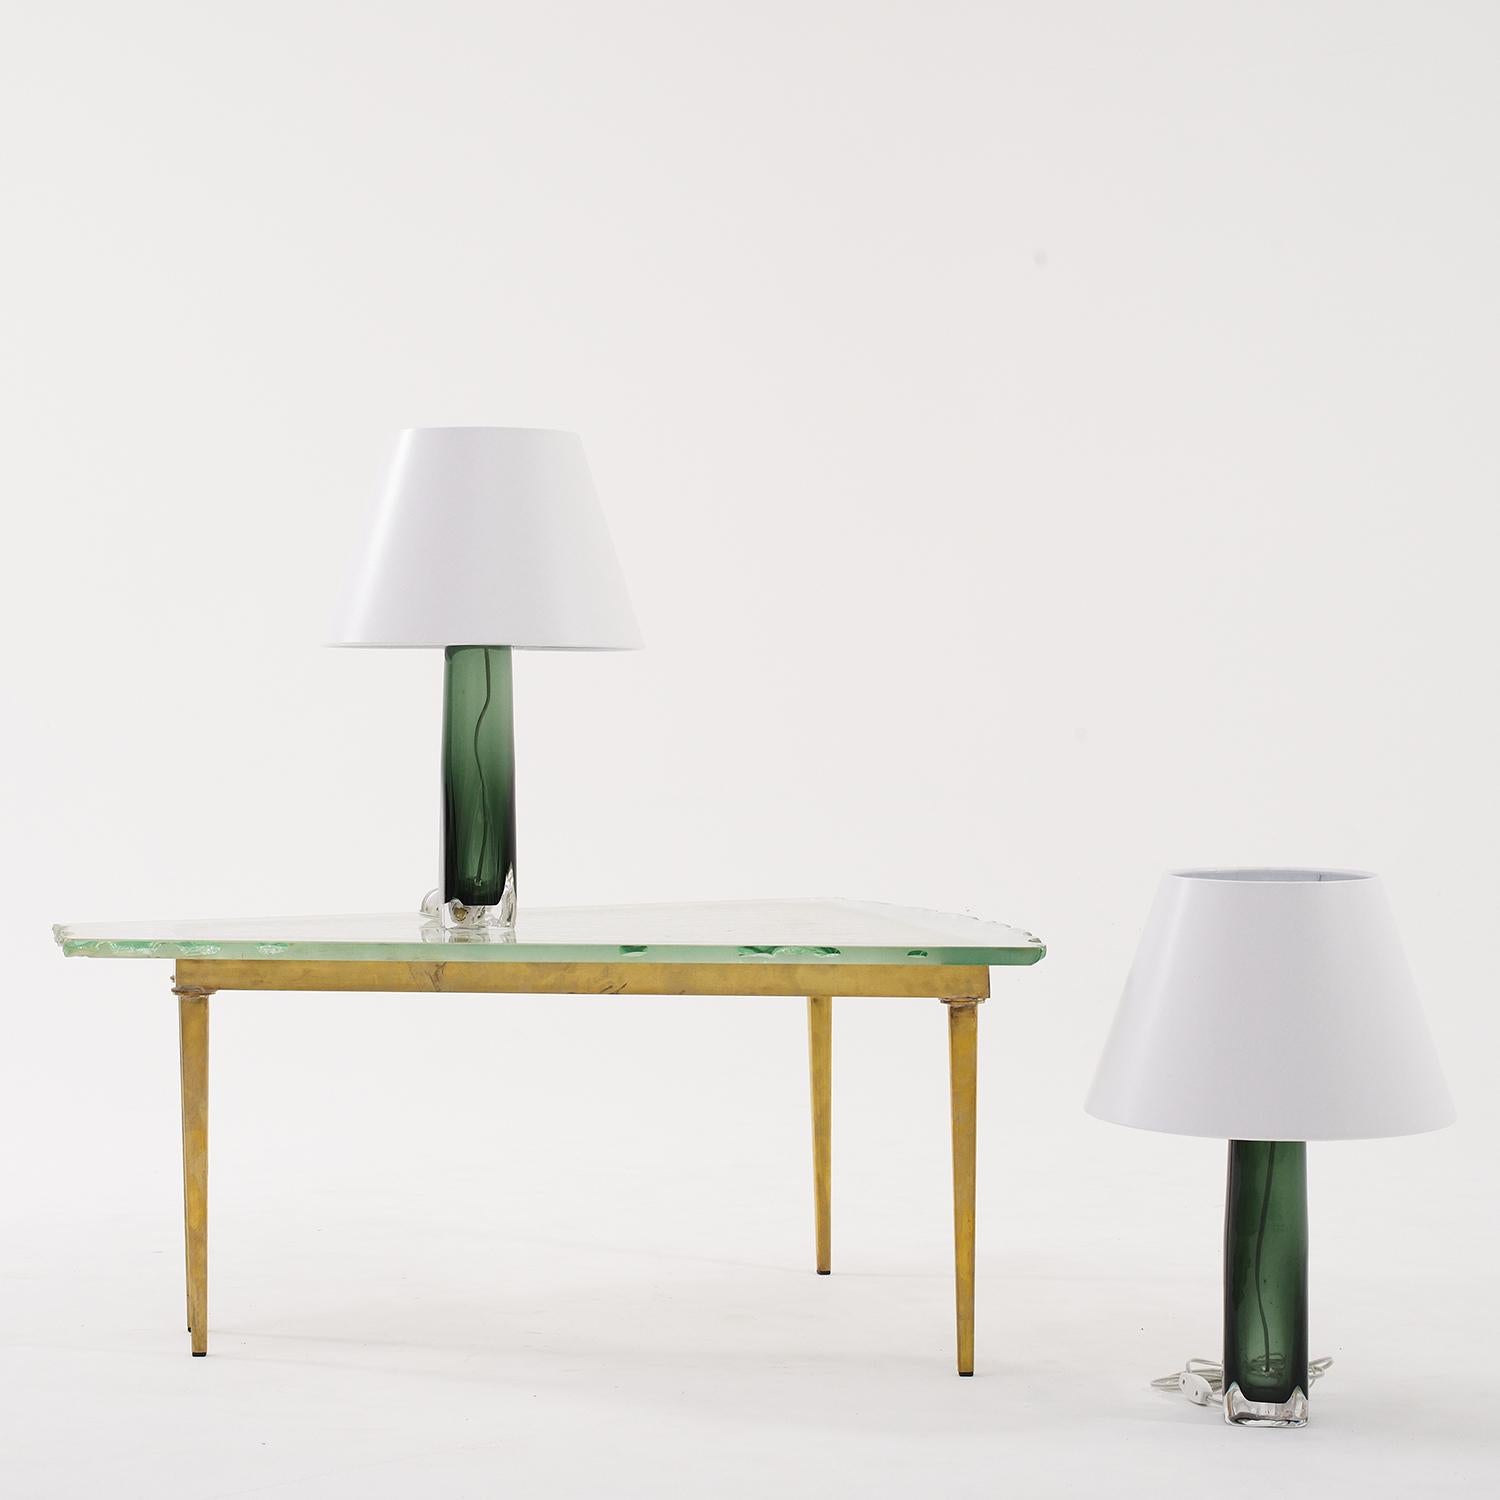 A dark-green, vintage Mid-Century modern Swedish pair of table lamps with a new white round shade, made of hand blown Orrefors glass, designed by Carl Fagerlund and produced, signed by Orrefors in good condition. The Scandinavian desk lights are